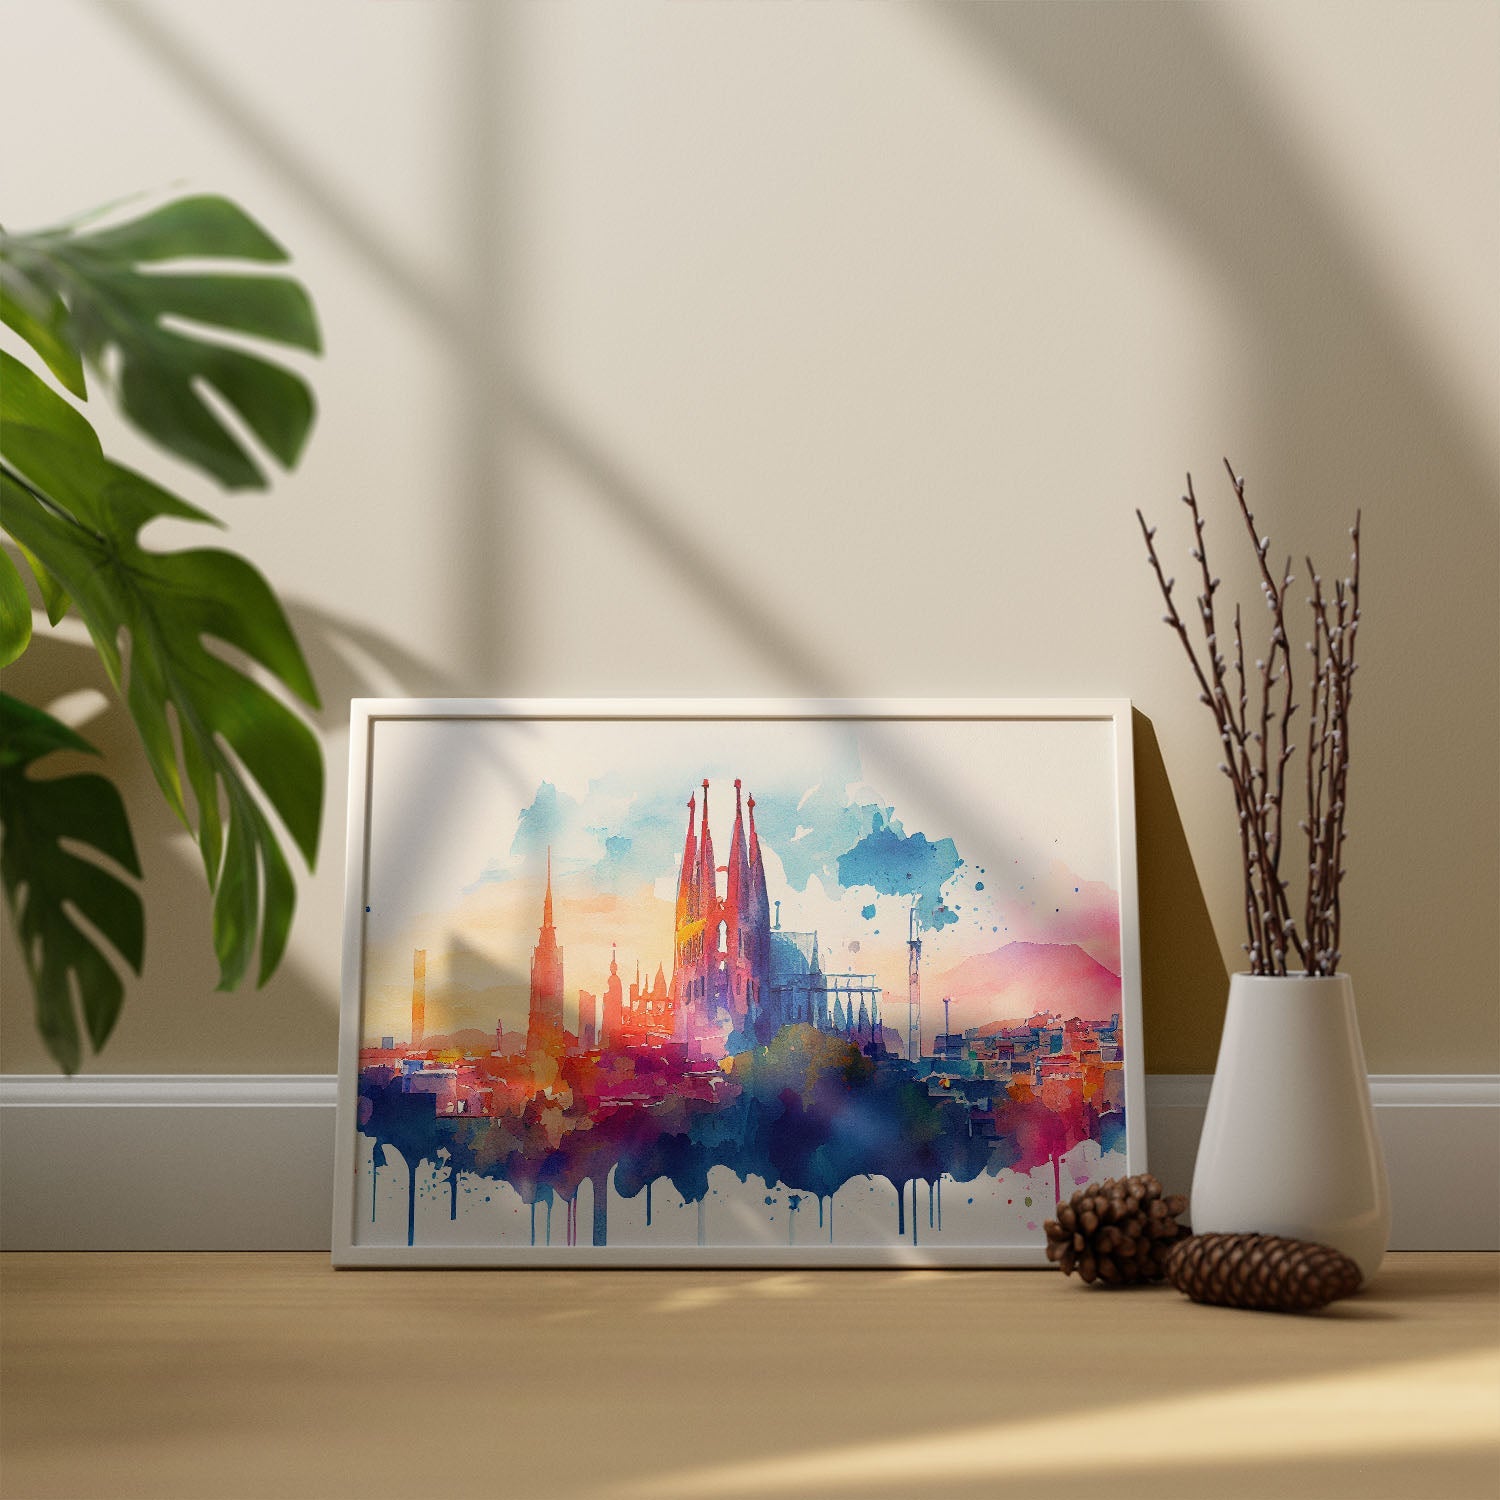 Nacnic watercolor of a skyline of the city of Barcelona_1. Aesthetic Wall Art Prints for Bedroom or Living Room Design.-Artwork-Nacnic-A4-Sin Marco-Nacnic Estudio SL